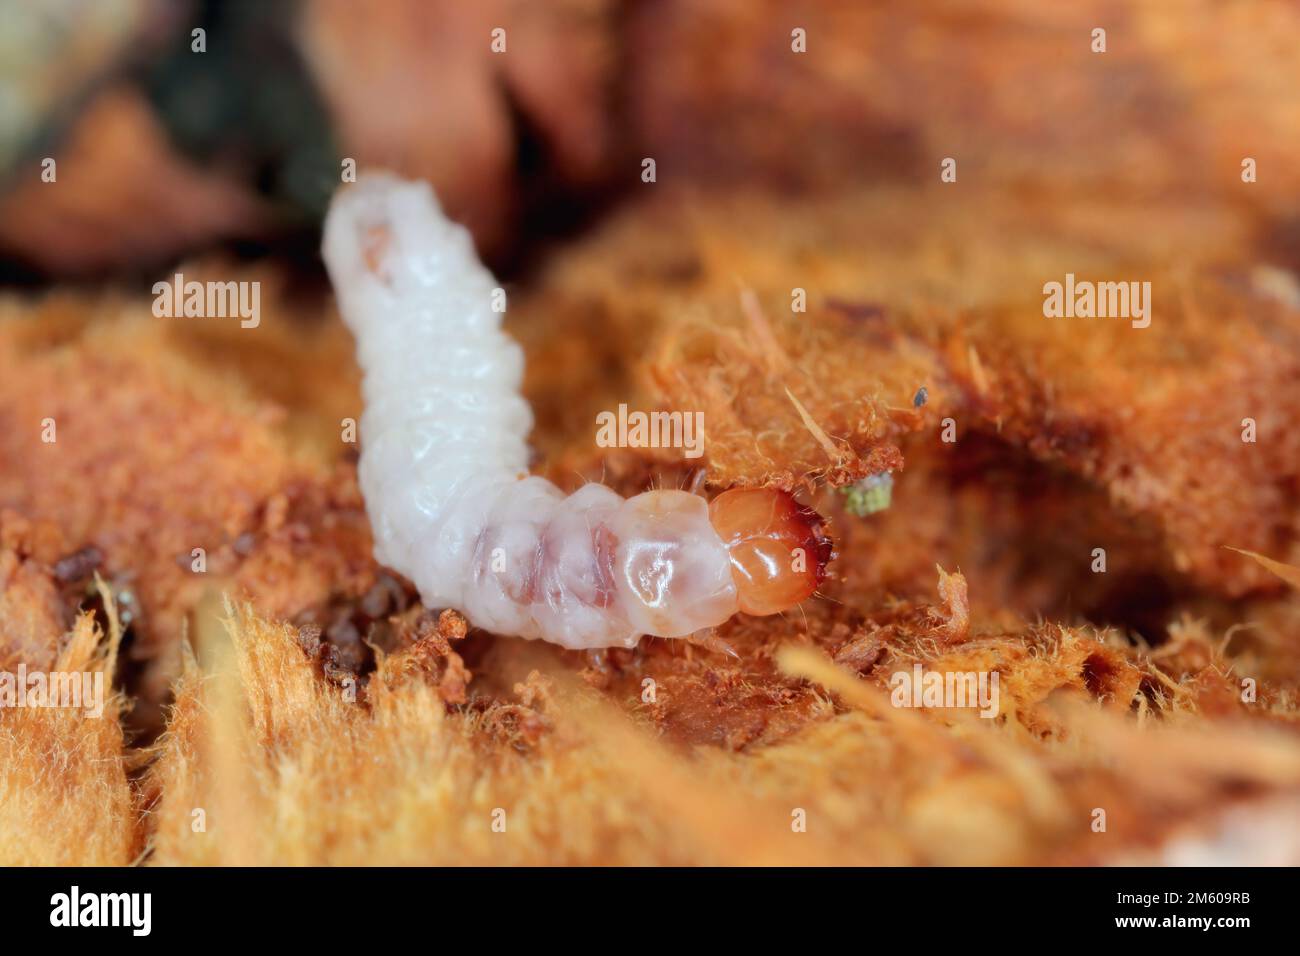 Melandryidae larva (Orchesia micans or luteipalpis) inside the fruiting body of an arboreal fungus. Stock Photo